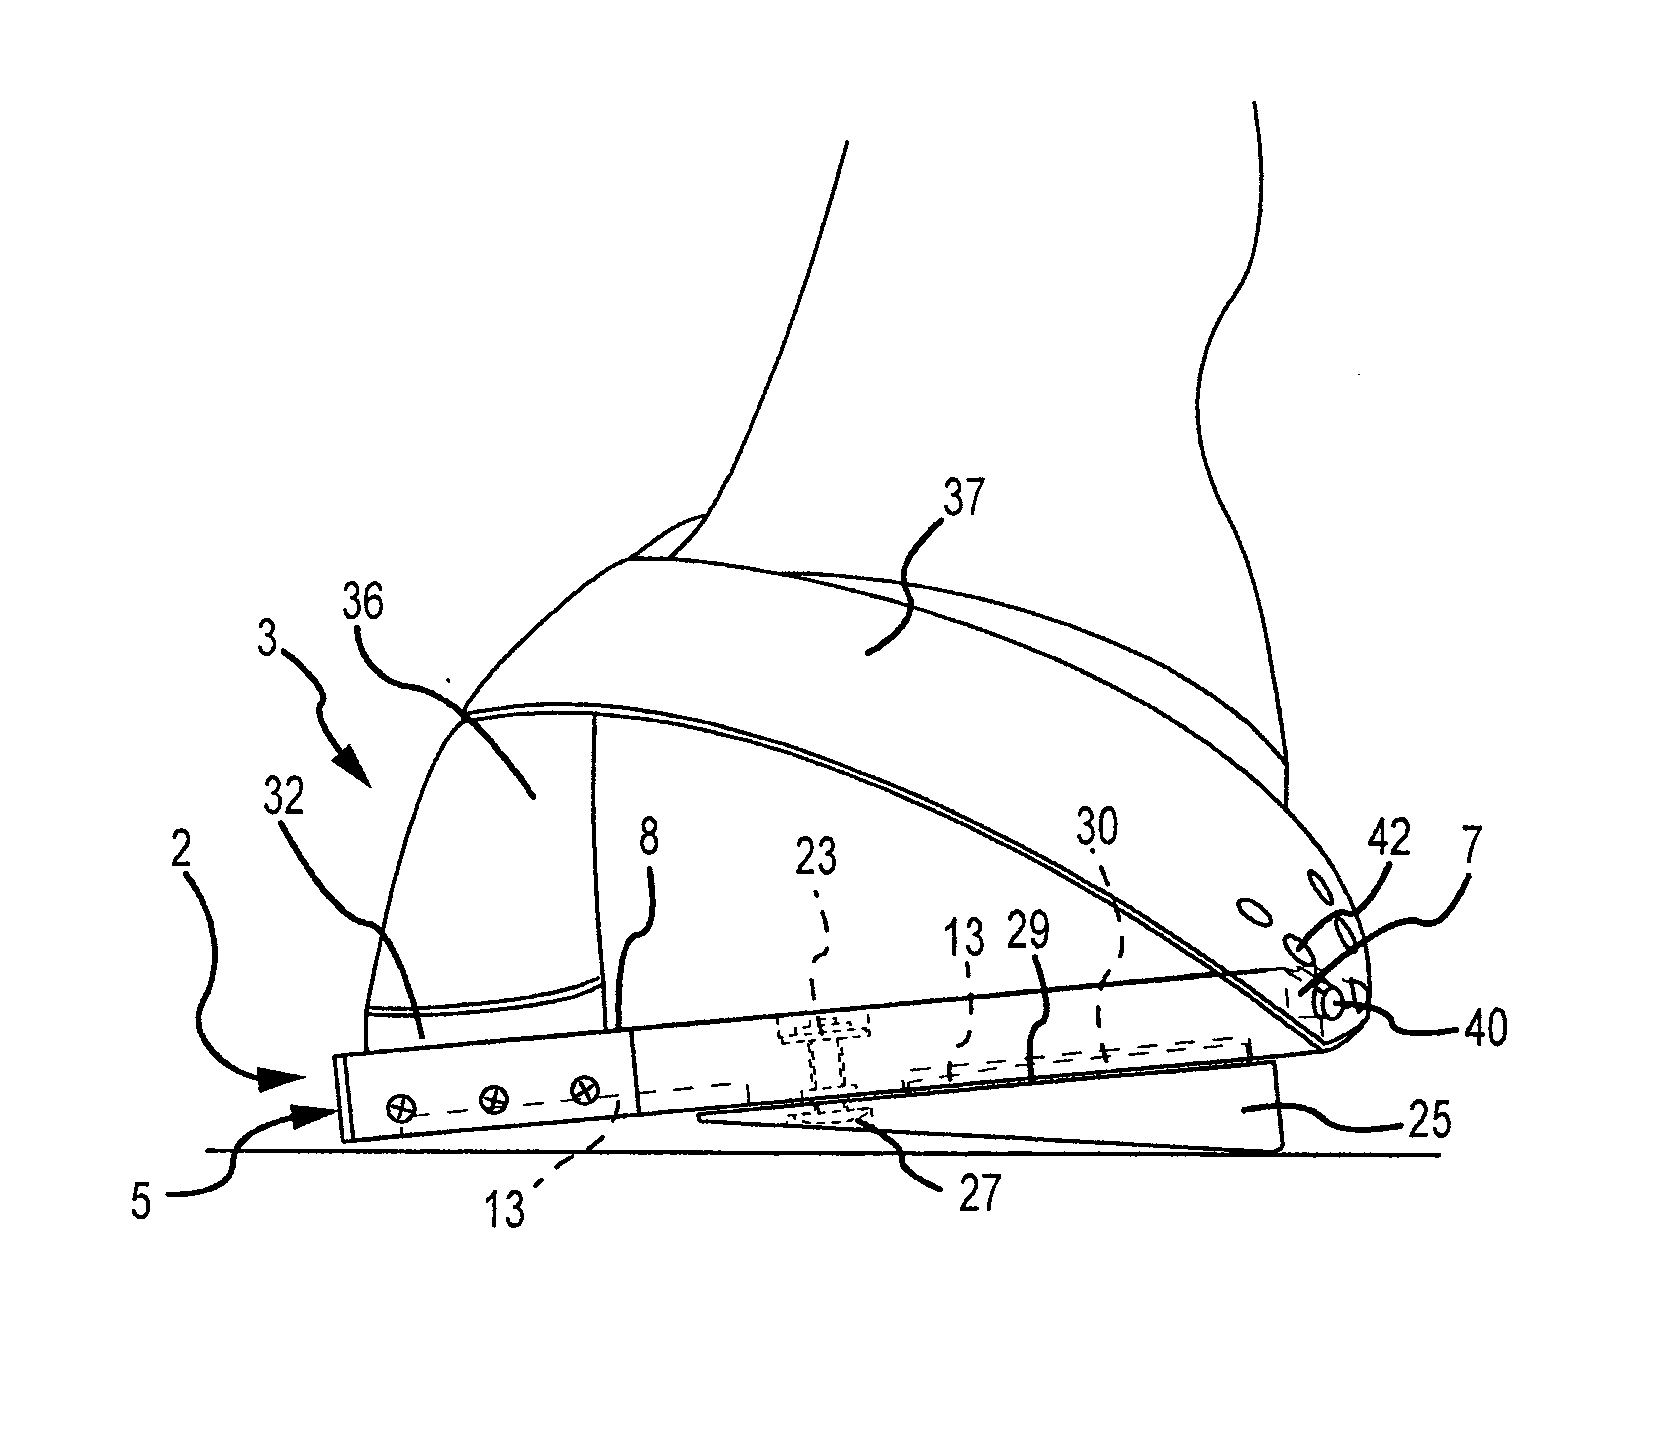 Apparatus And Method For Diagnostic Leverage Testing Of Equine Distal Limb